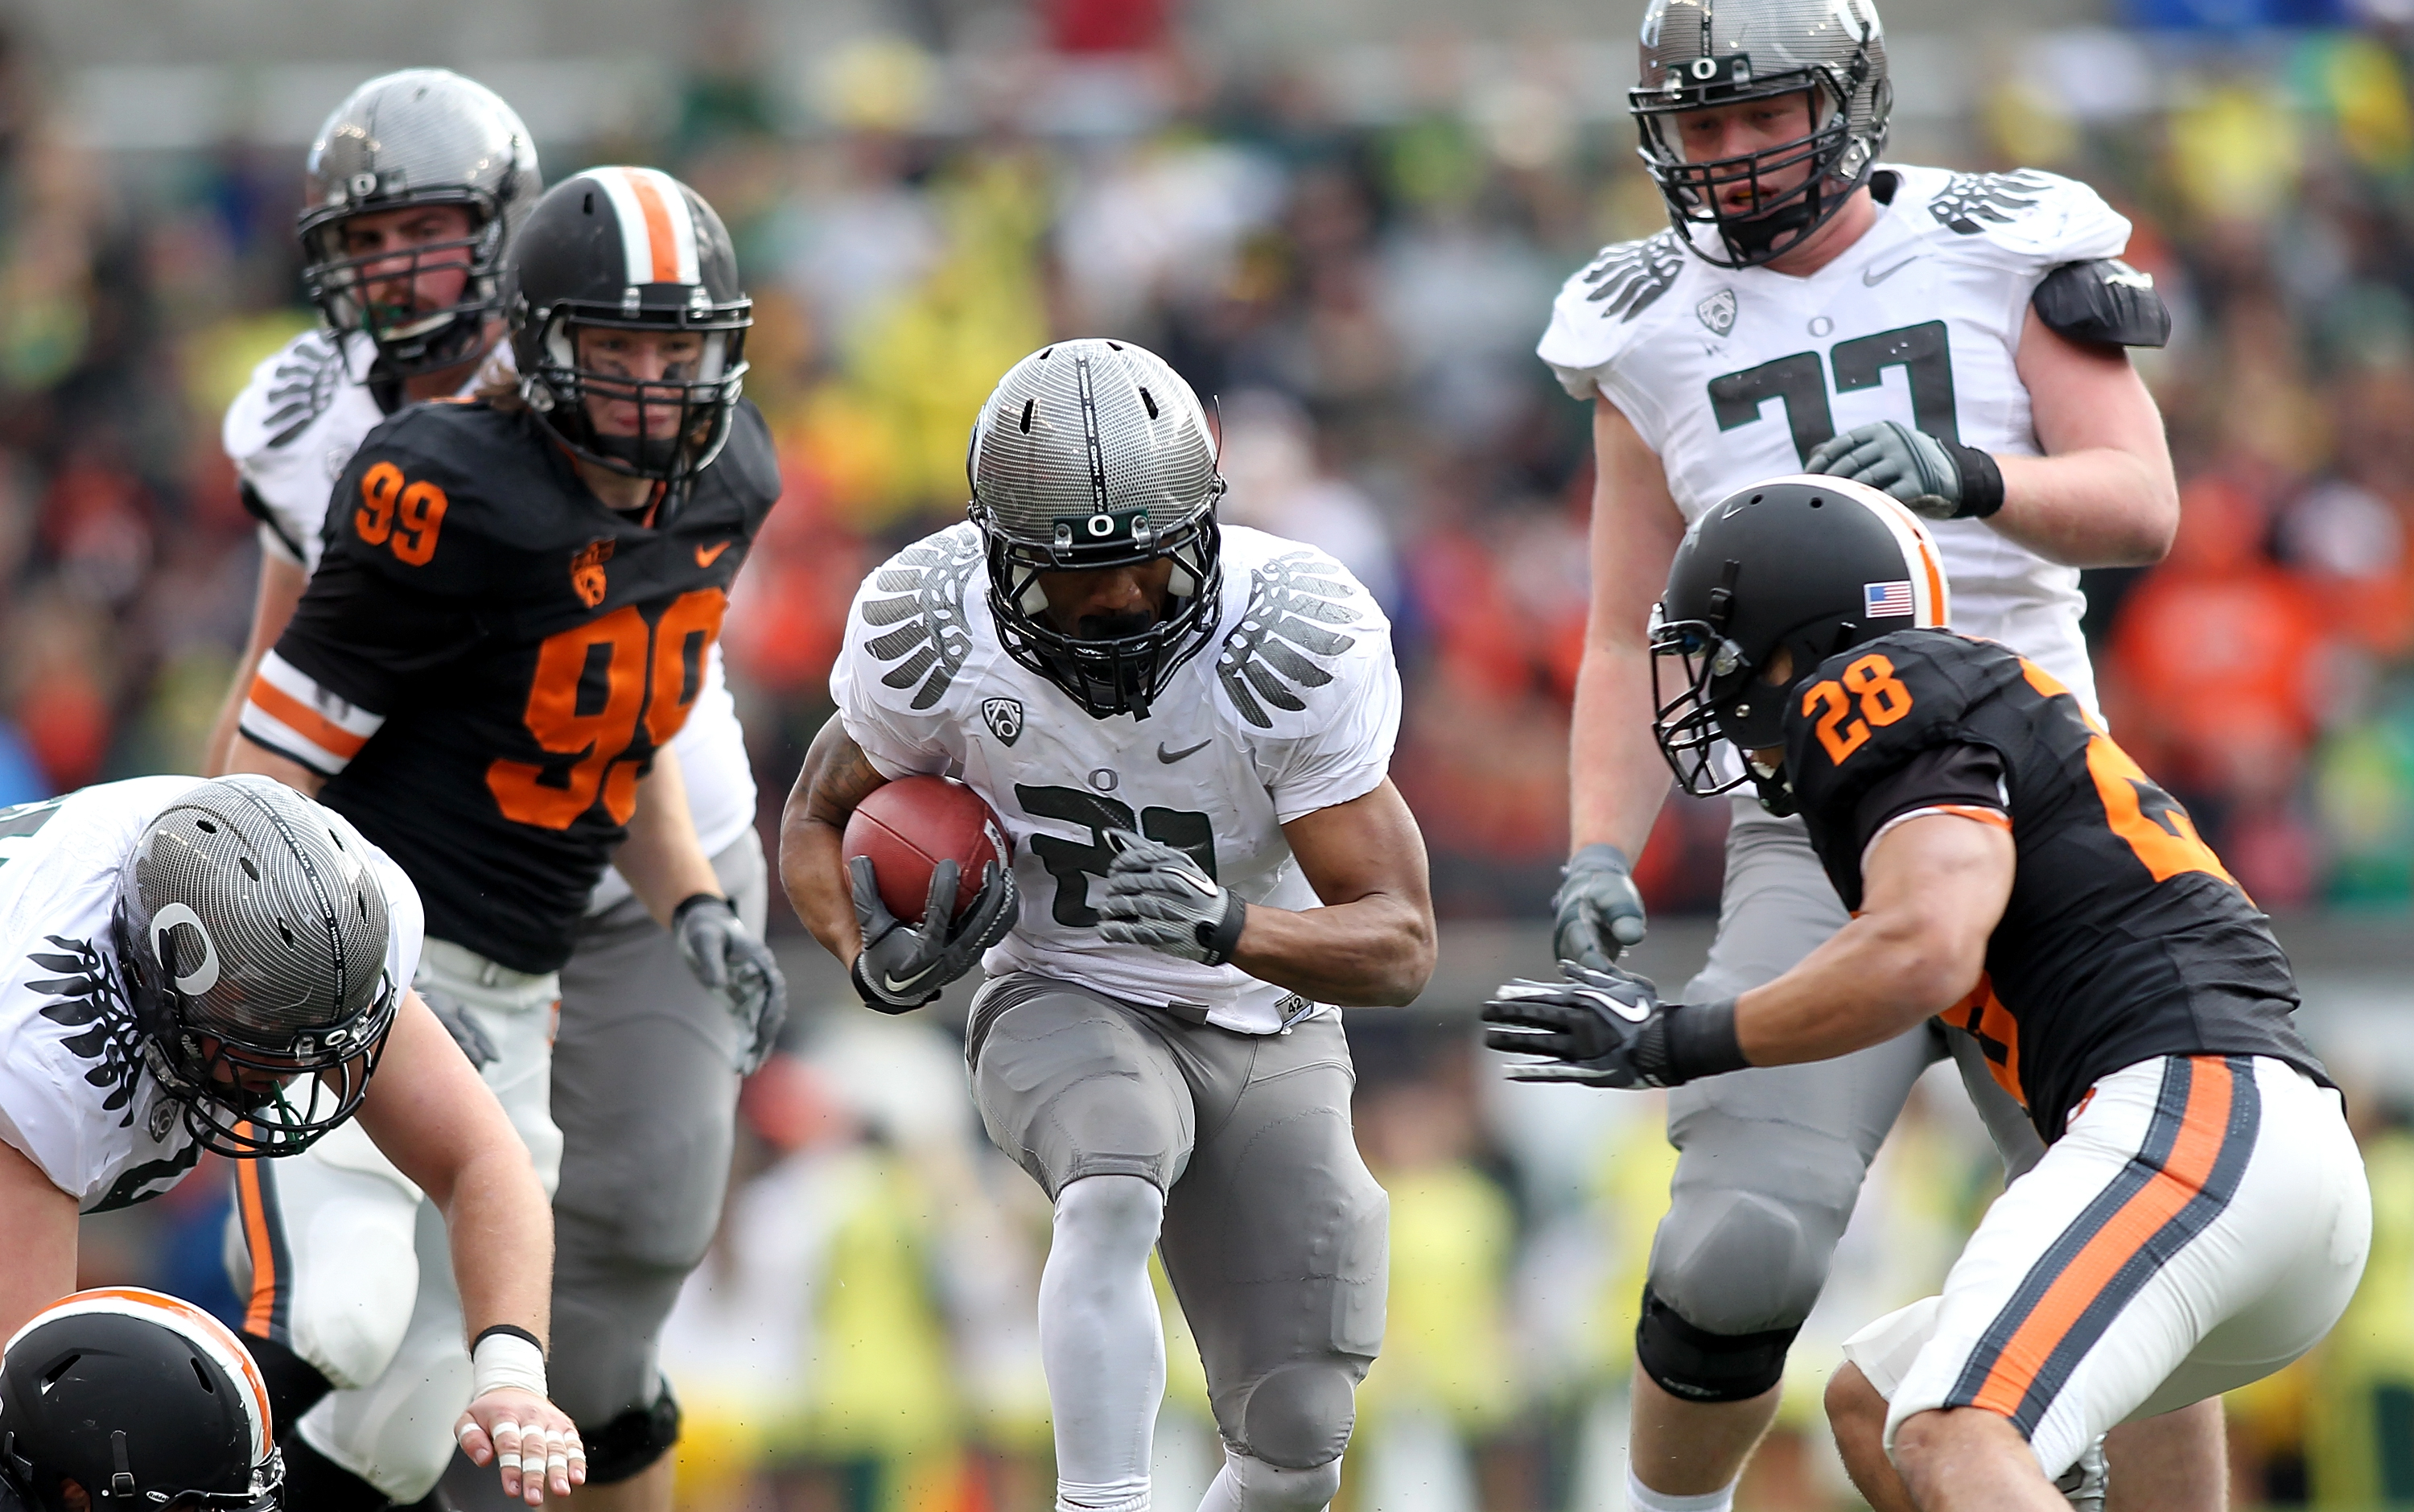 CORVALLIS, OR - DECEMBER 04:  LaMichael James #21 of the Oregon Ducks runs the ball against  Suaesi Tuimanei #28 of the Oregon State Beavers during the 114th Civil War on December 4, 2010 at the Reser Stadium in Corvallis, Oregon.  (Photo by Jonathan Ferr